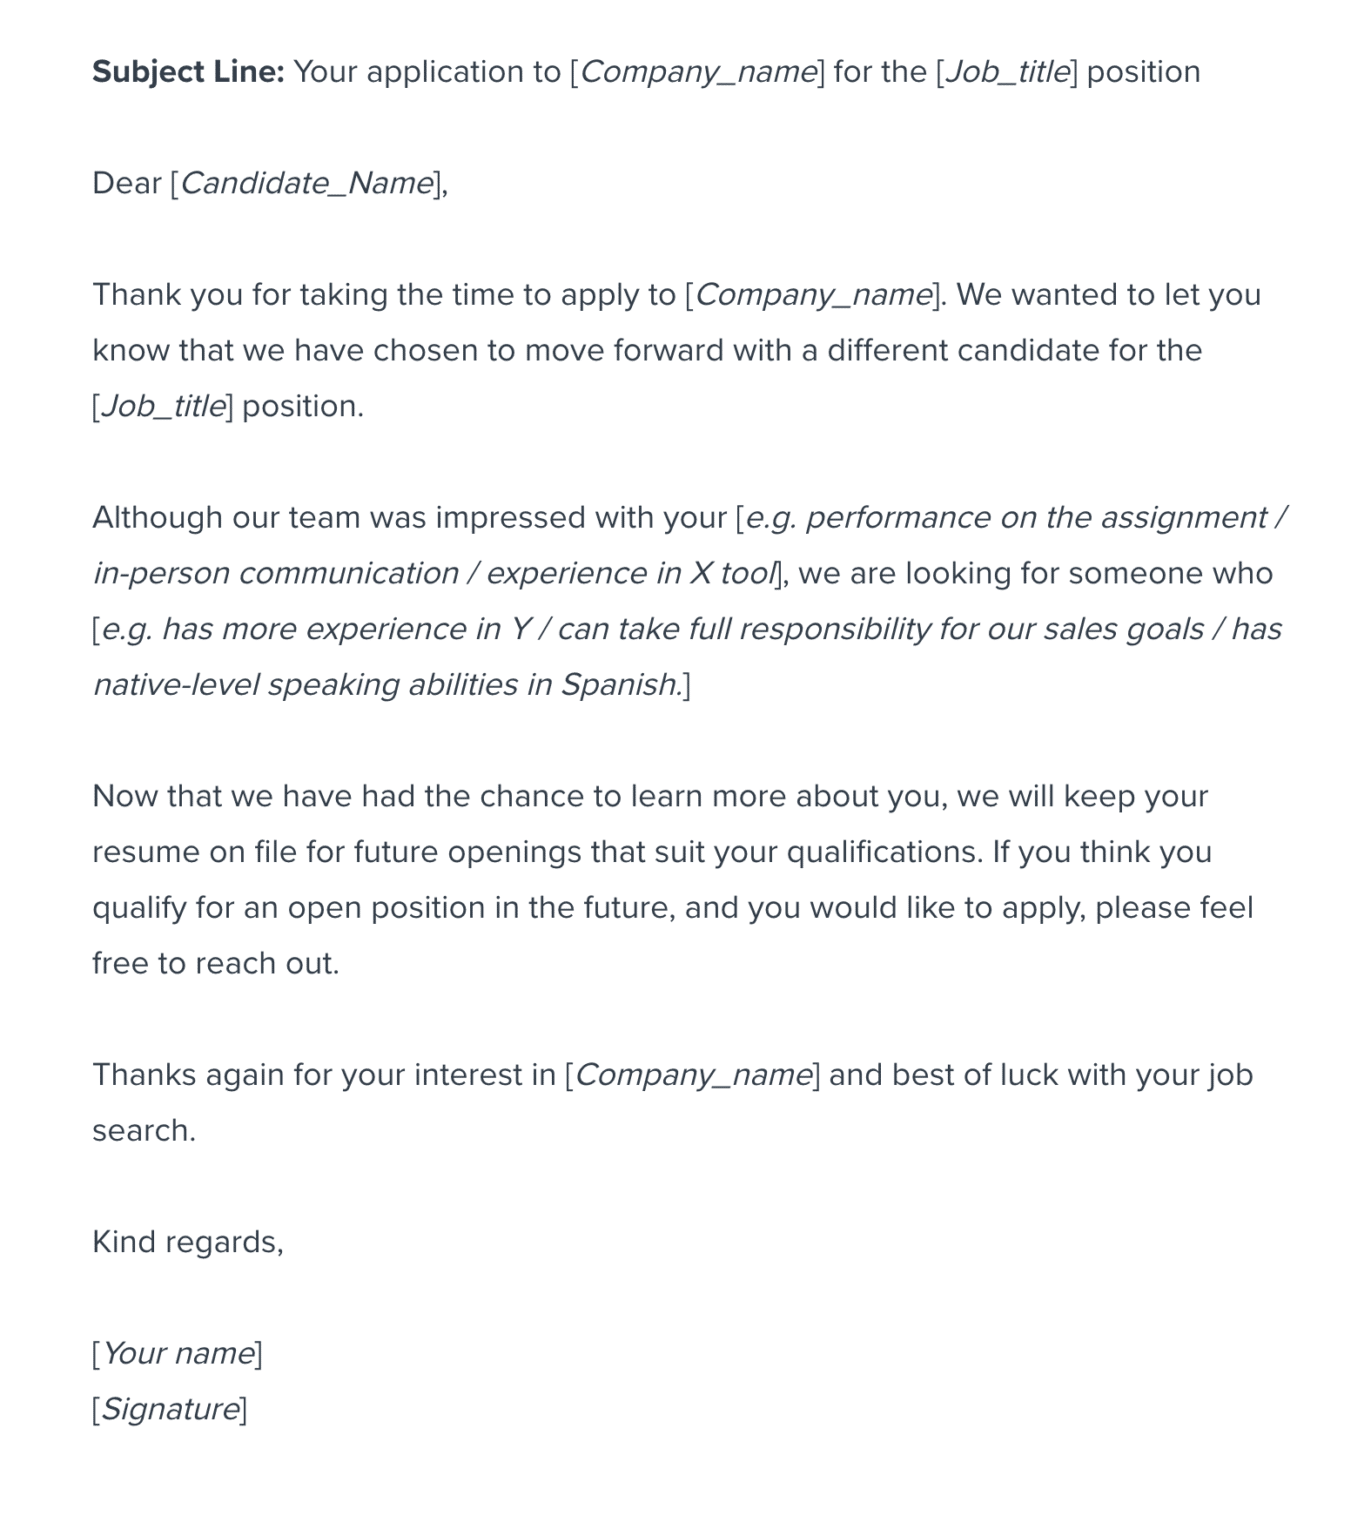 Interview feedback to candidates email template